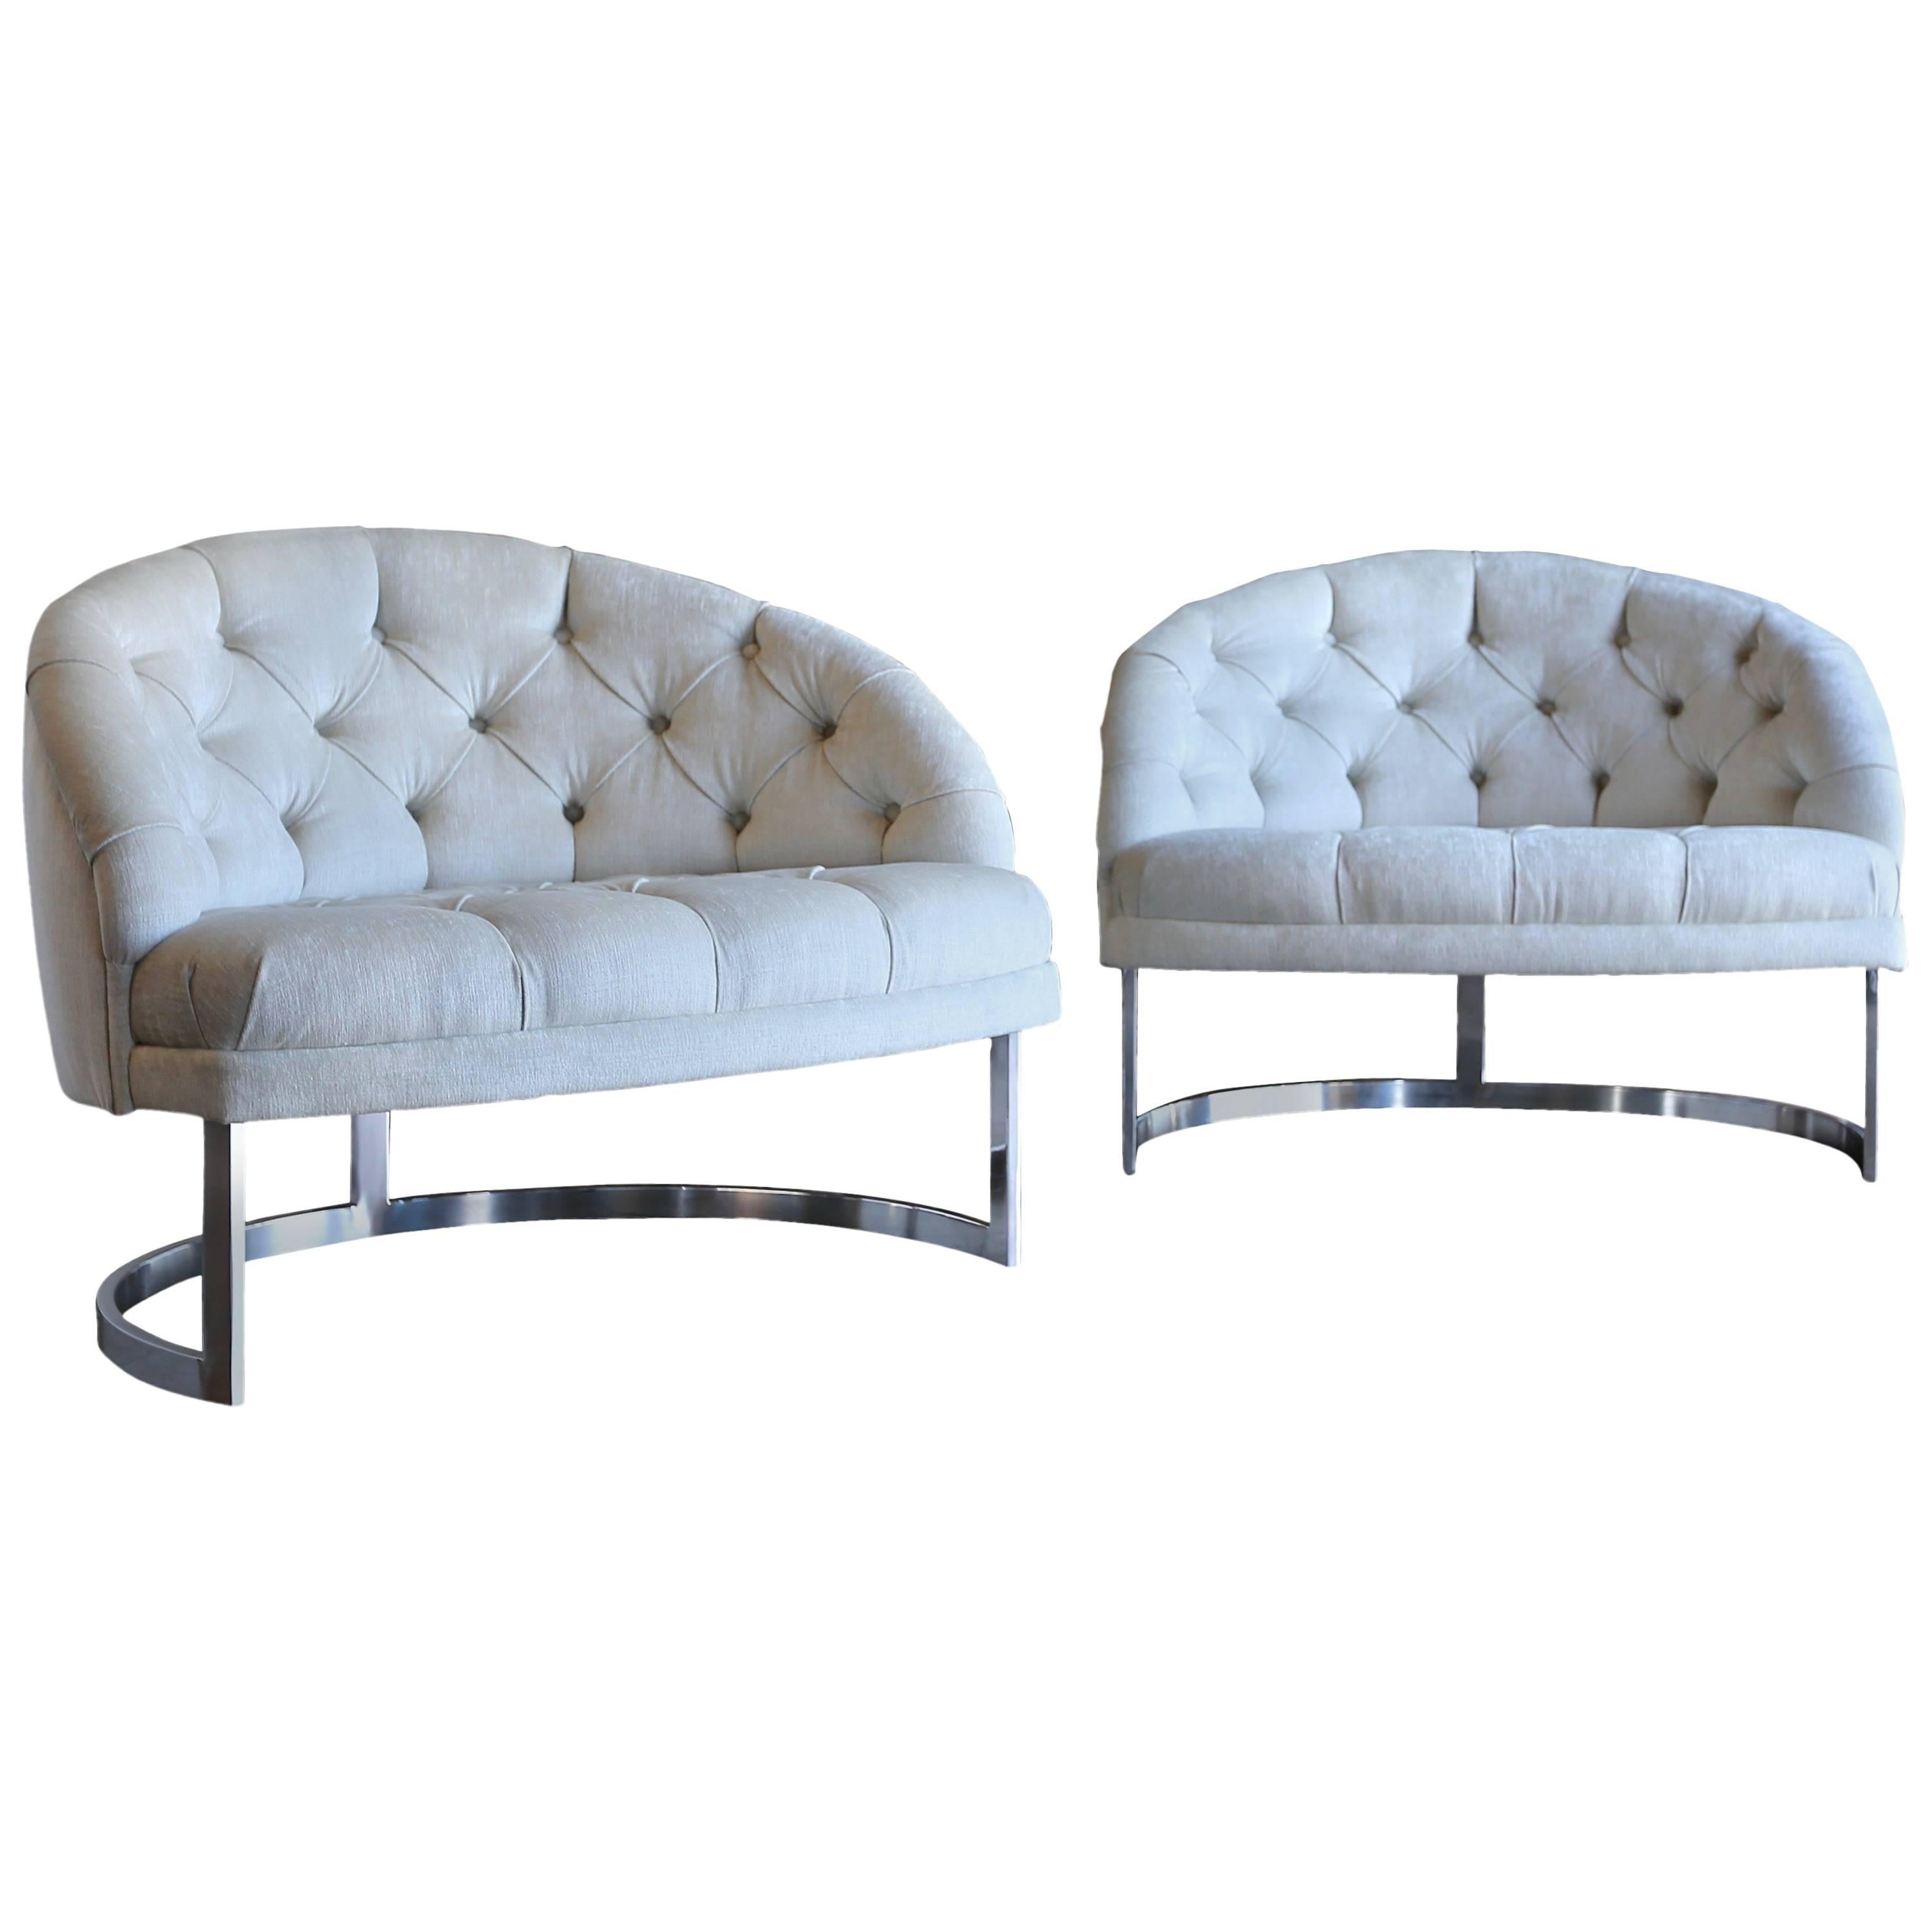 Pair of Deep Tufted Barrel Back Lounge Chairs